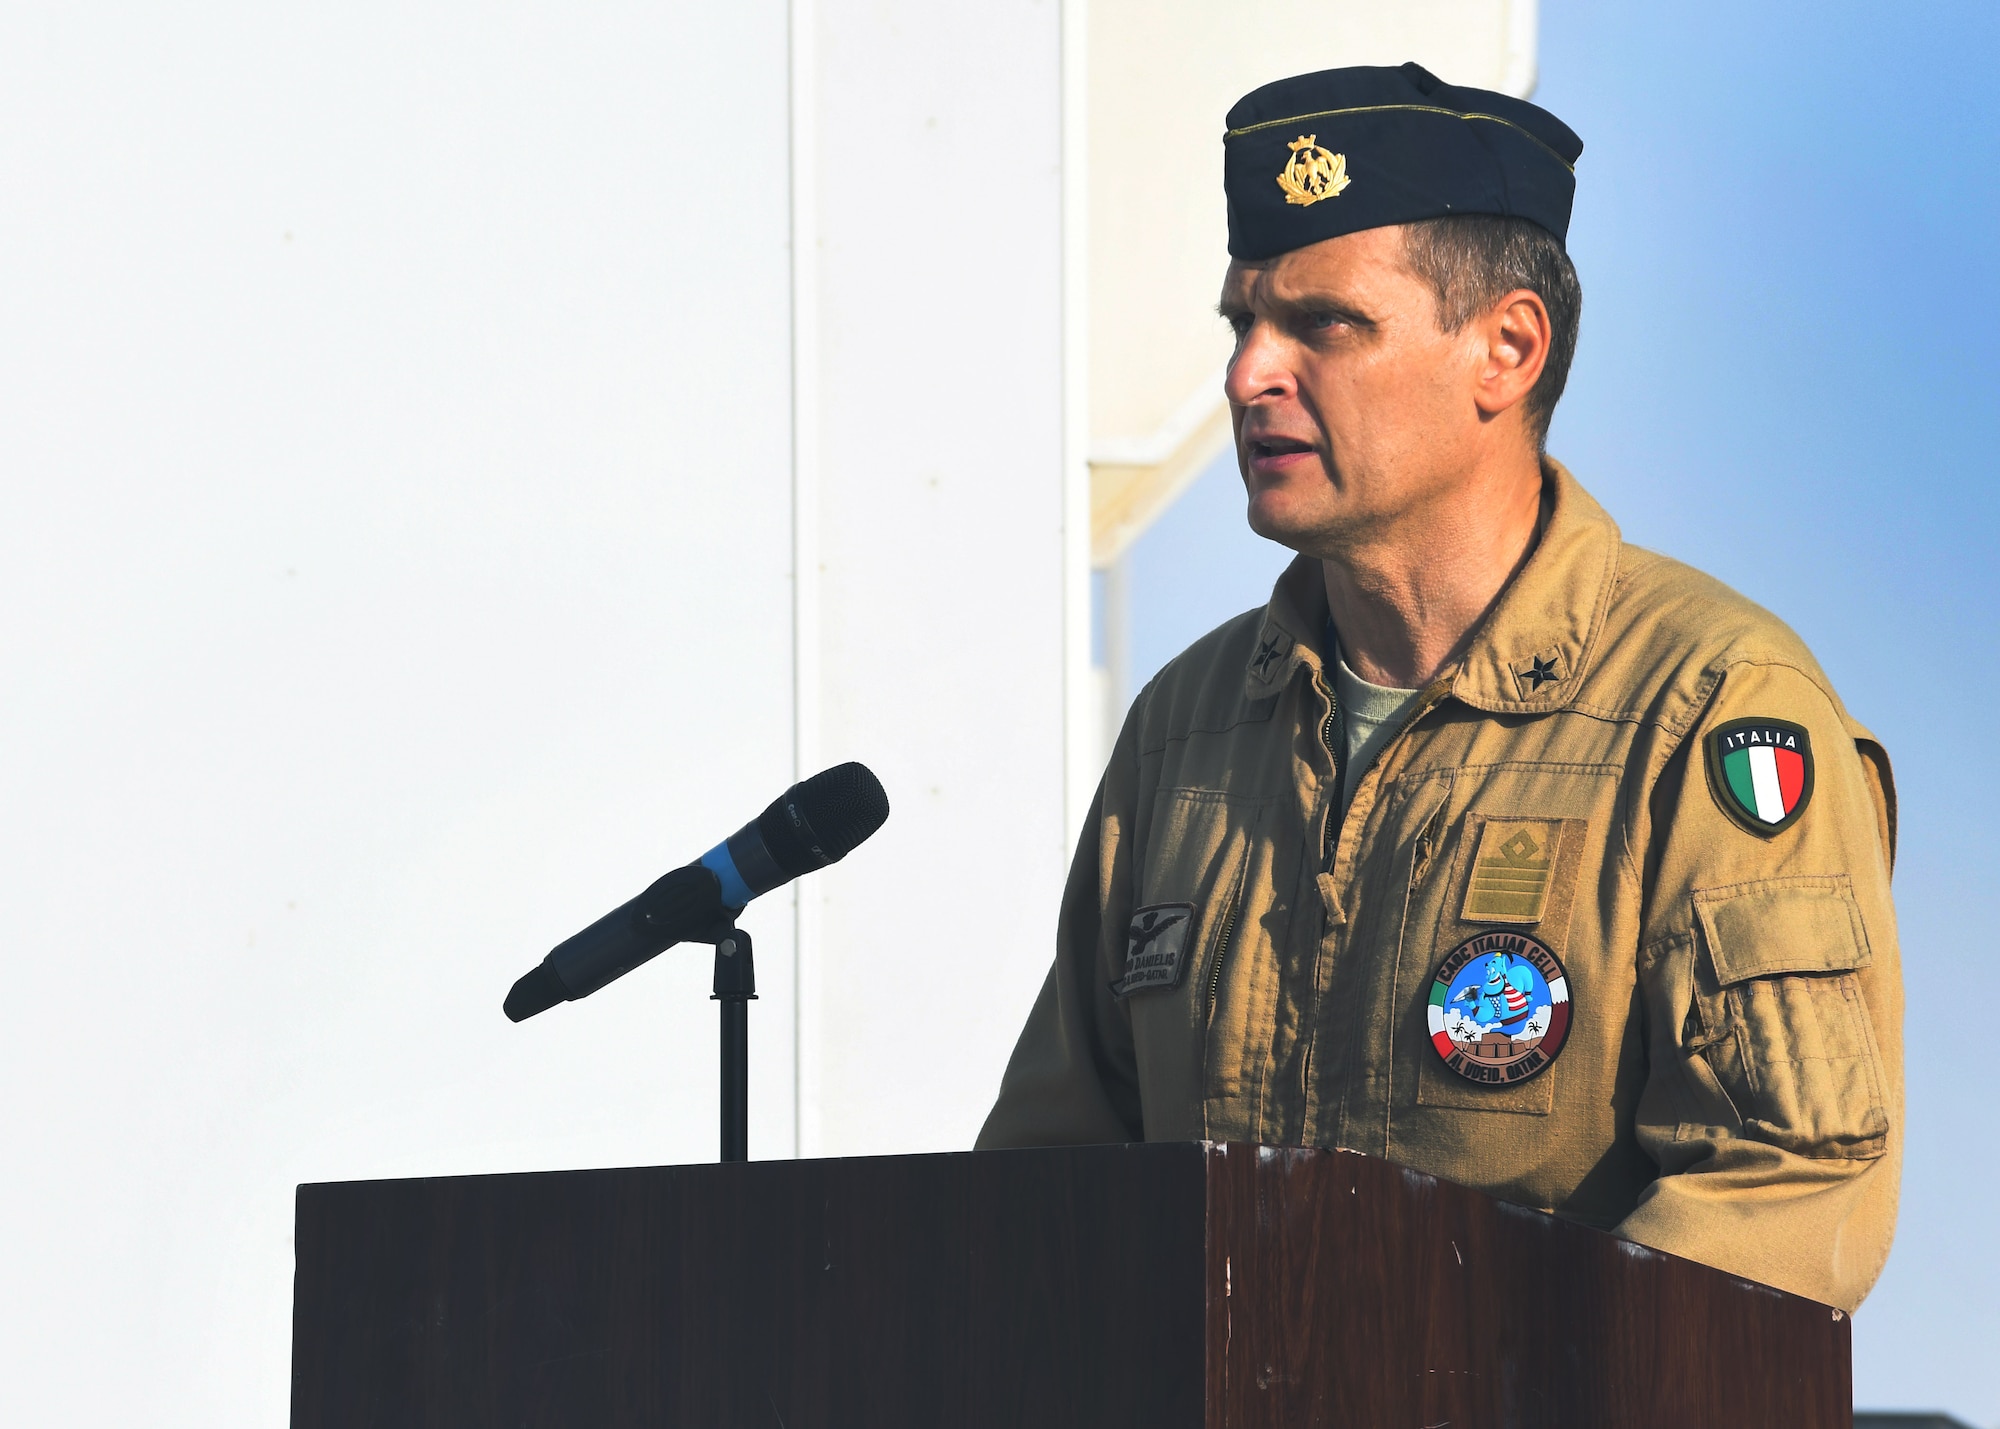 Col. Flavio Danielis, Italian Detachment senior officer at the Combined Air Operations Center, speaks during the Italian Armed Forces Day ceremony at Al Udeid Air Base, Qatar Nov. 4, 2016. The Italian Detachment, as well as representatives from Qatar, Air Forces Central Command, the 379th Air Expeditionary Wing and other agencies, gathered at the Memorial Plaza to commemorate the day of remembrance and to give their time and thanks to those who served and currently serve in the Armed Forces. (U.S. Air Force Photo by Senior Airman Miles Wilson)
